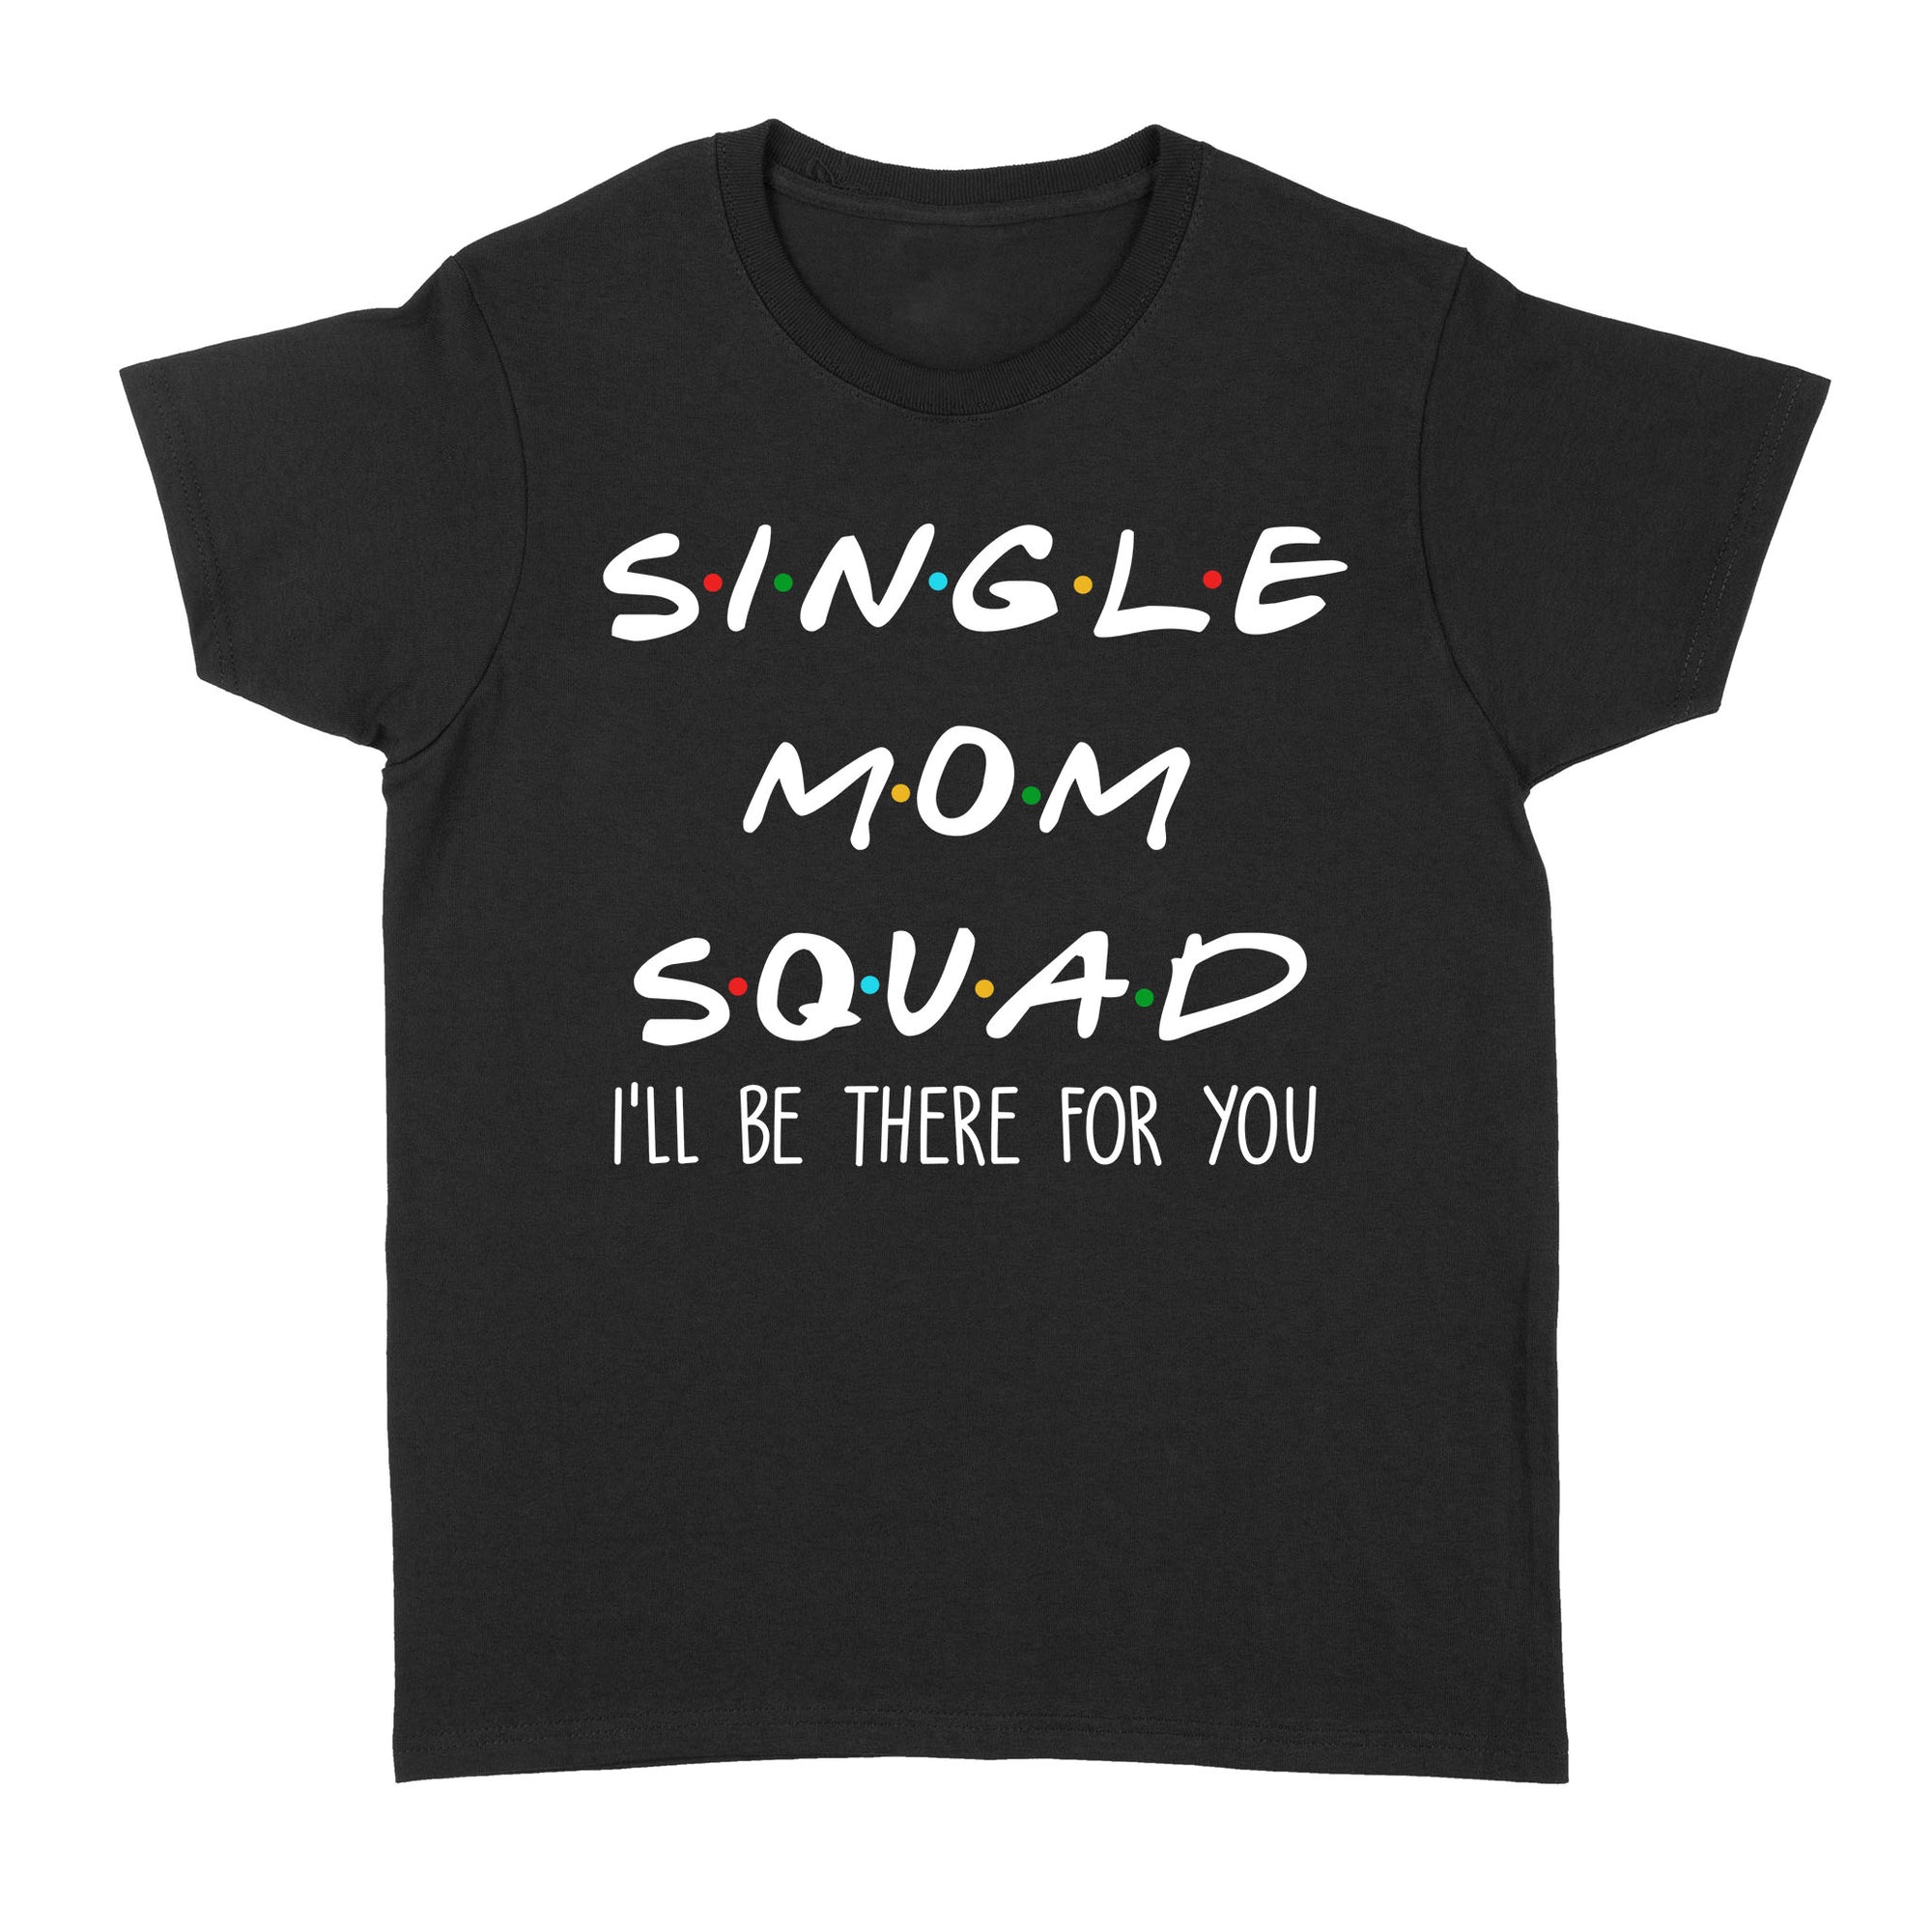 Single Mom Squad I'll Be There For You Friends Funnt Gift Ideas for Single Mom w - Standard Women's T-shirt